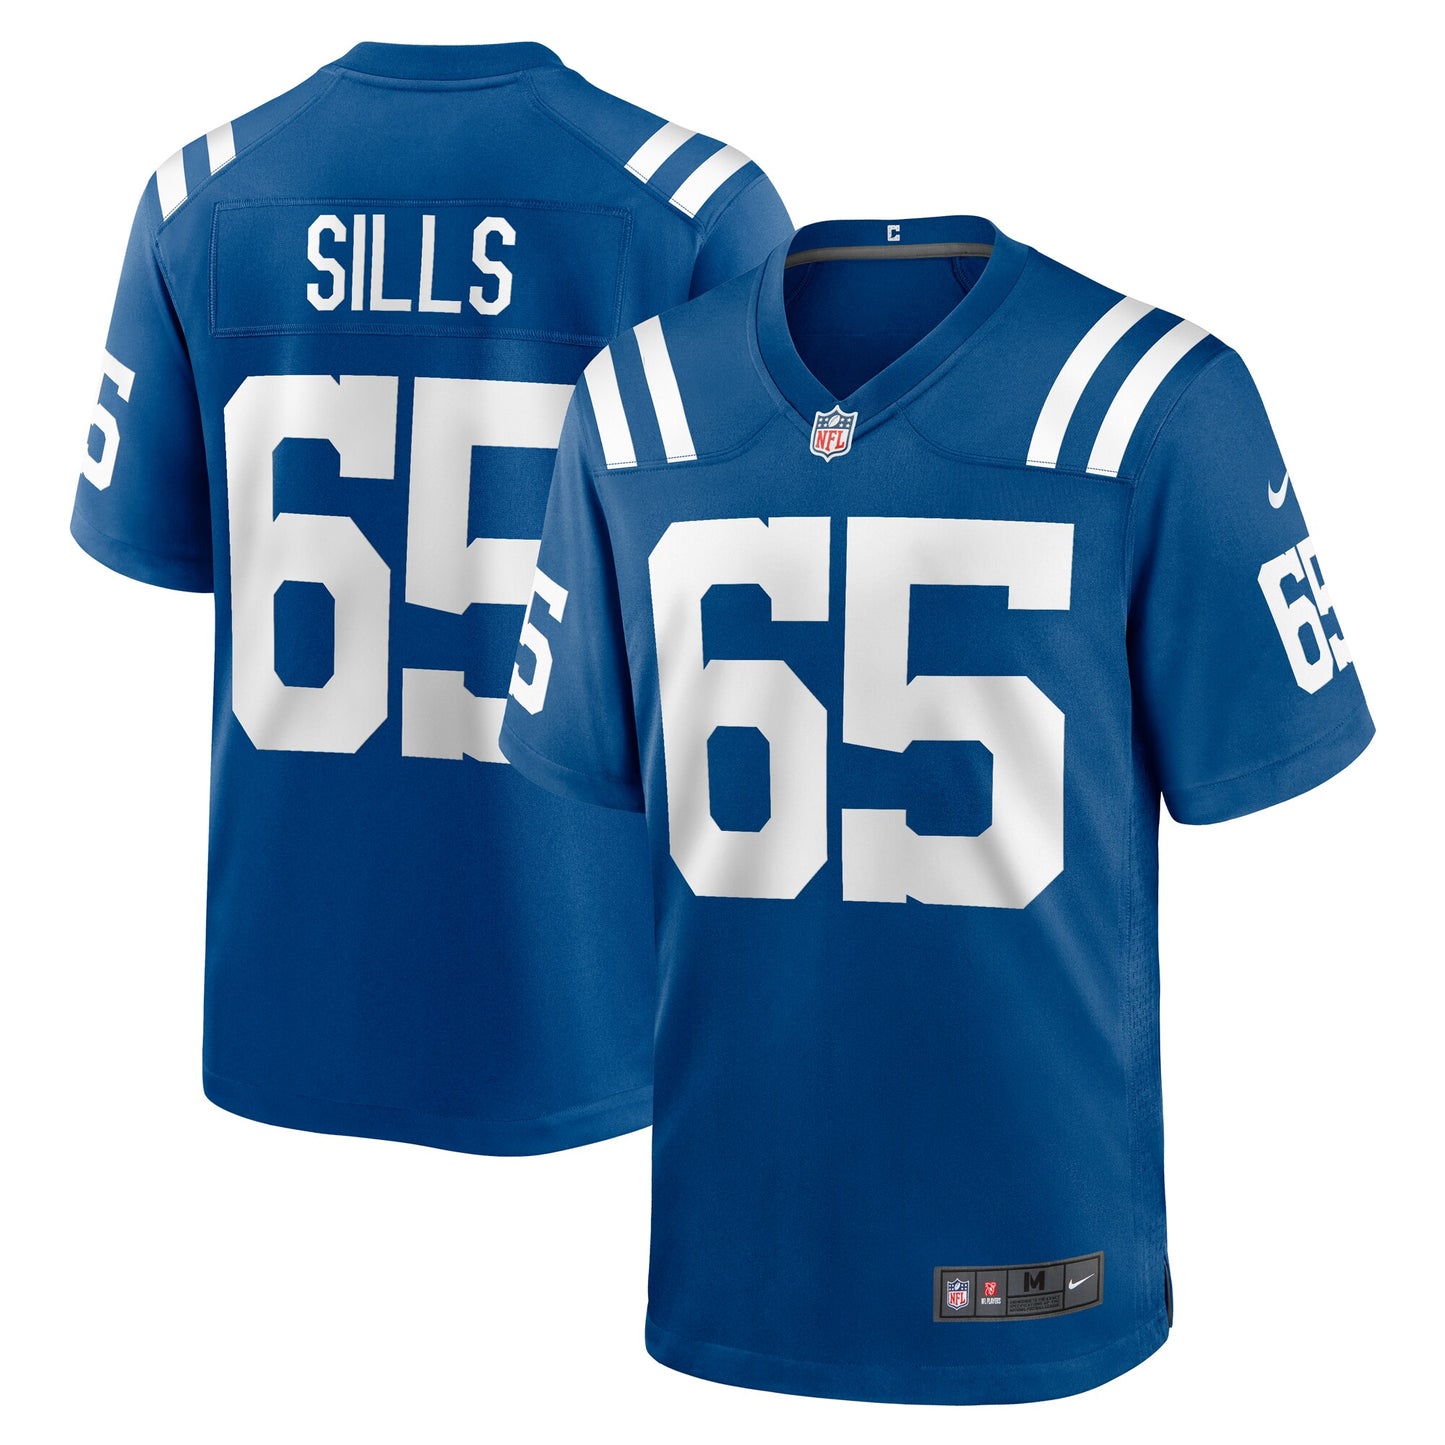 Josh Sills Indianapolis Colts Nike Team Game Jersey - Royal